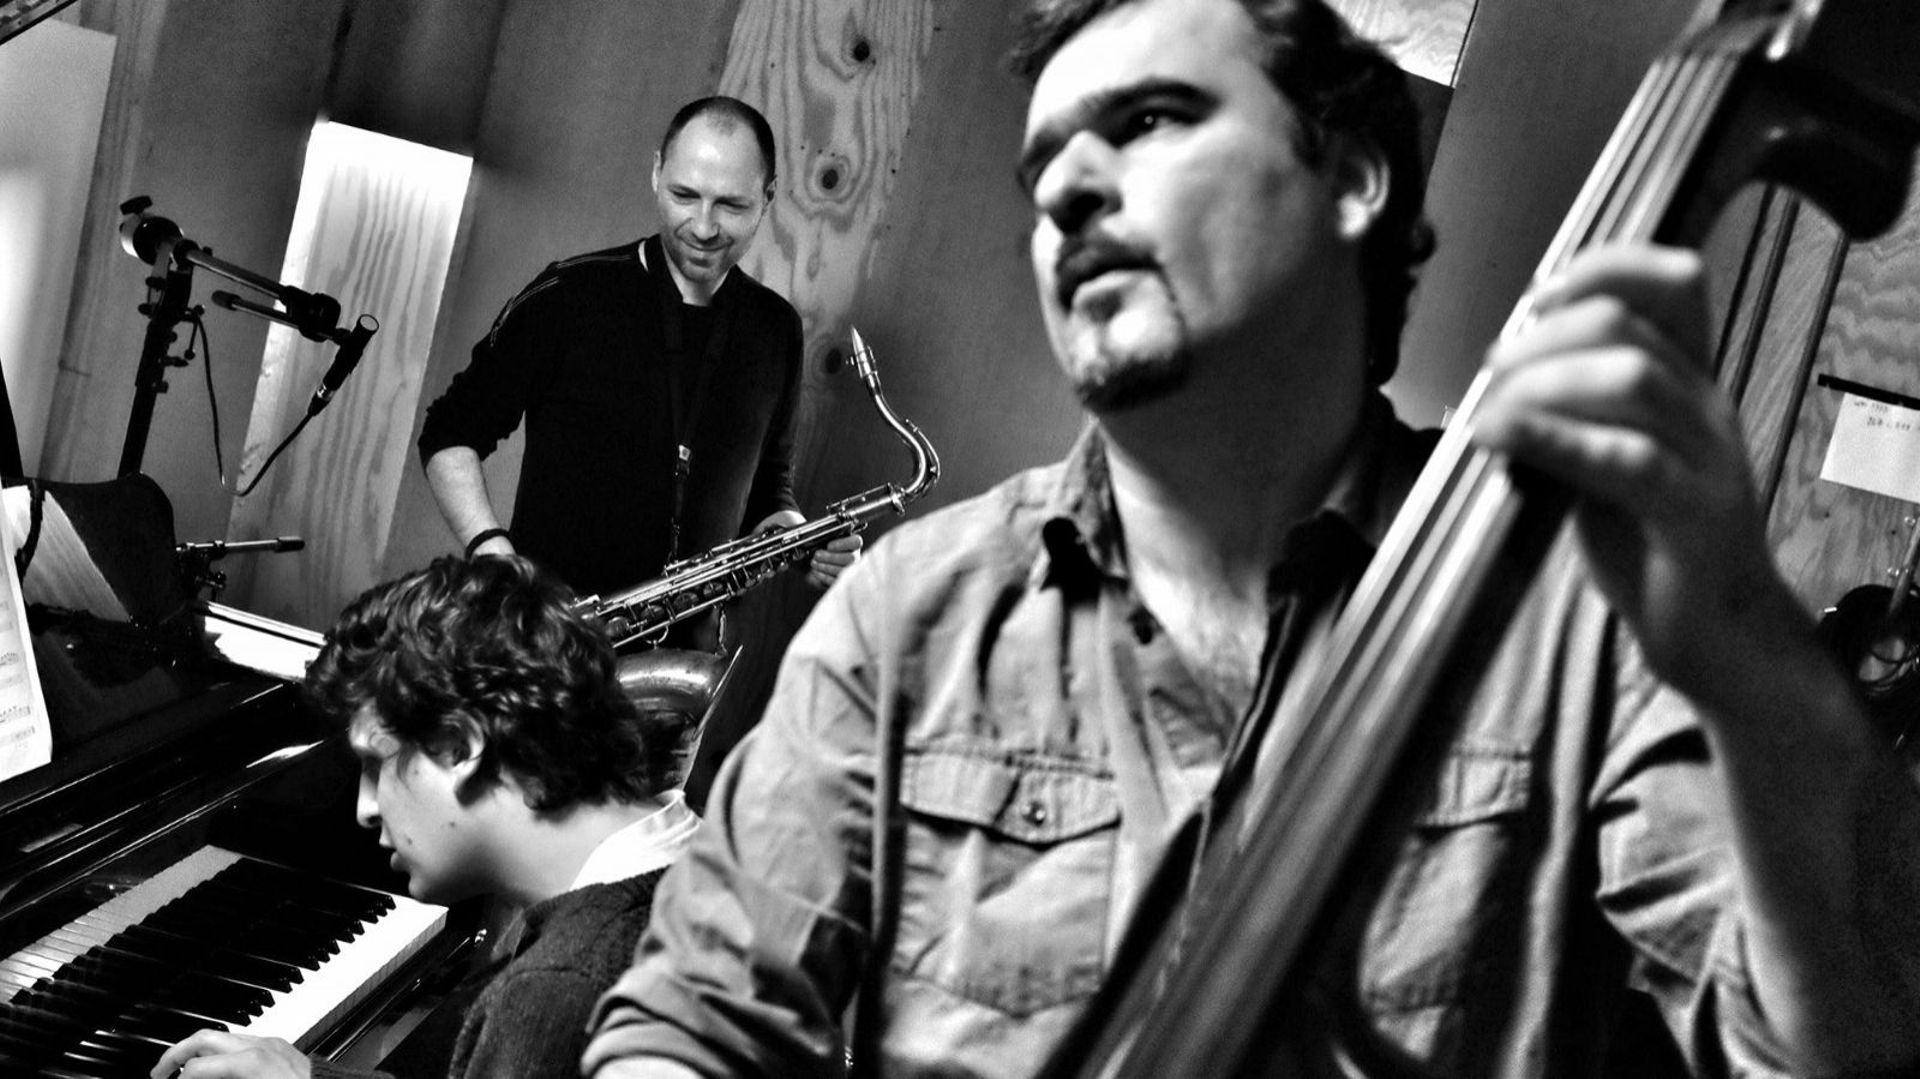 Pascal Mohy (Piano), Manuel Hermia (Saxophone), Sam Gerstmans (Contrebasse)